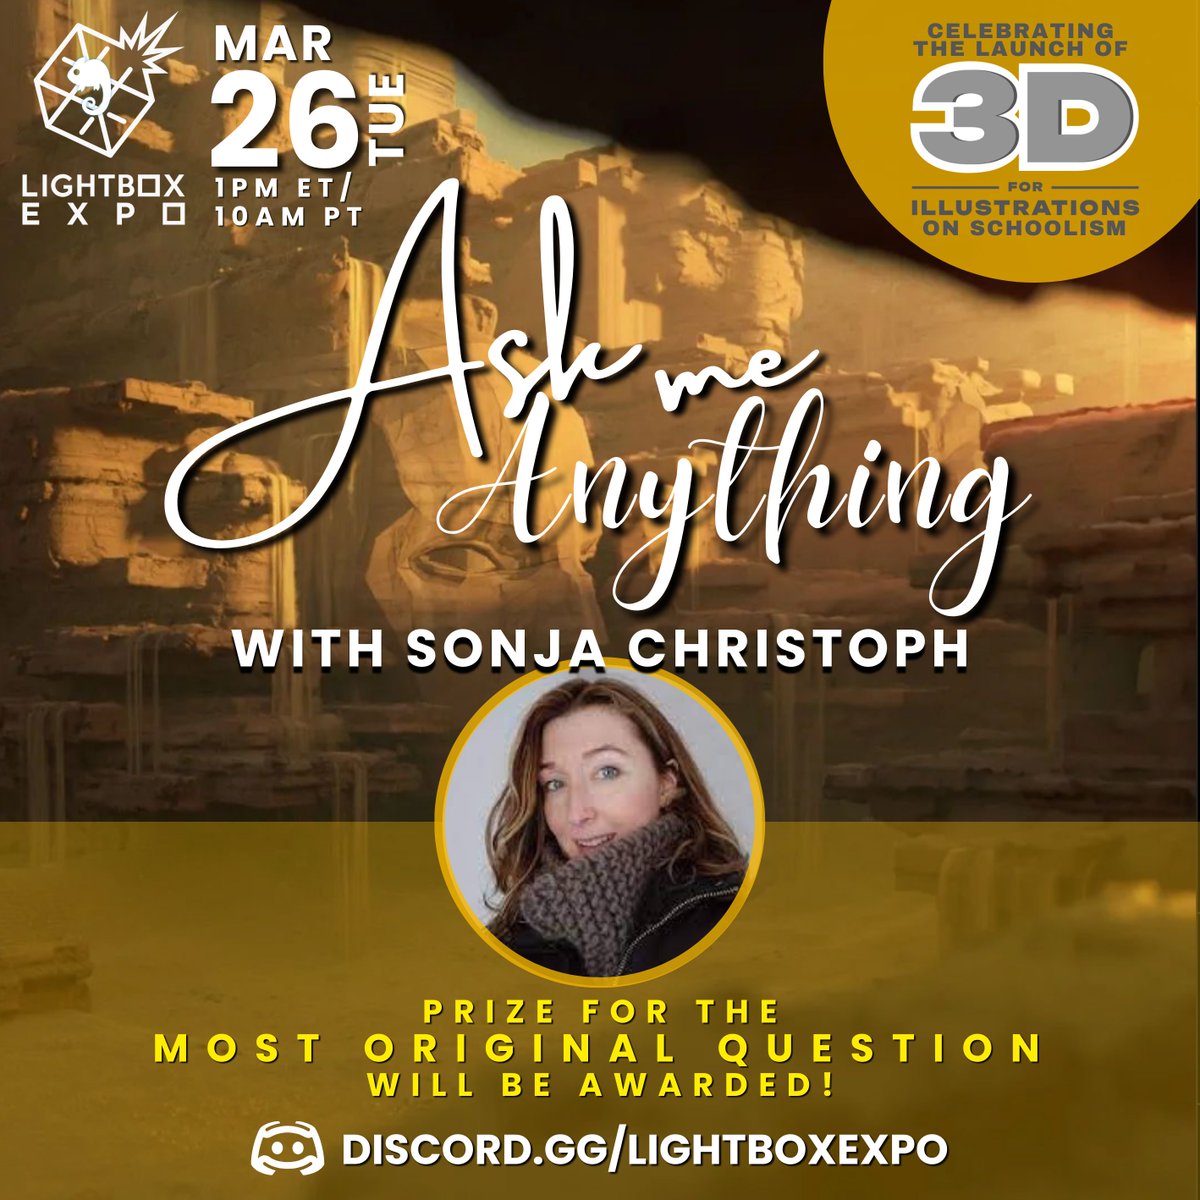 Join artist Sonja Christoph LIVE on the Lightbox Expo Discord for an epic Ask Me Anything! Come prepared with an original question for a chance to win a prize! 📅 Date: March 26 Tue 📷 Time: 10am PT/ 1pm ET 📍 Place: discord.gg/lightboxexpo